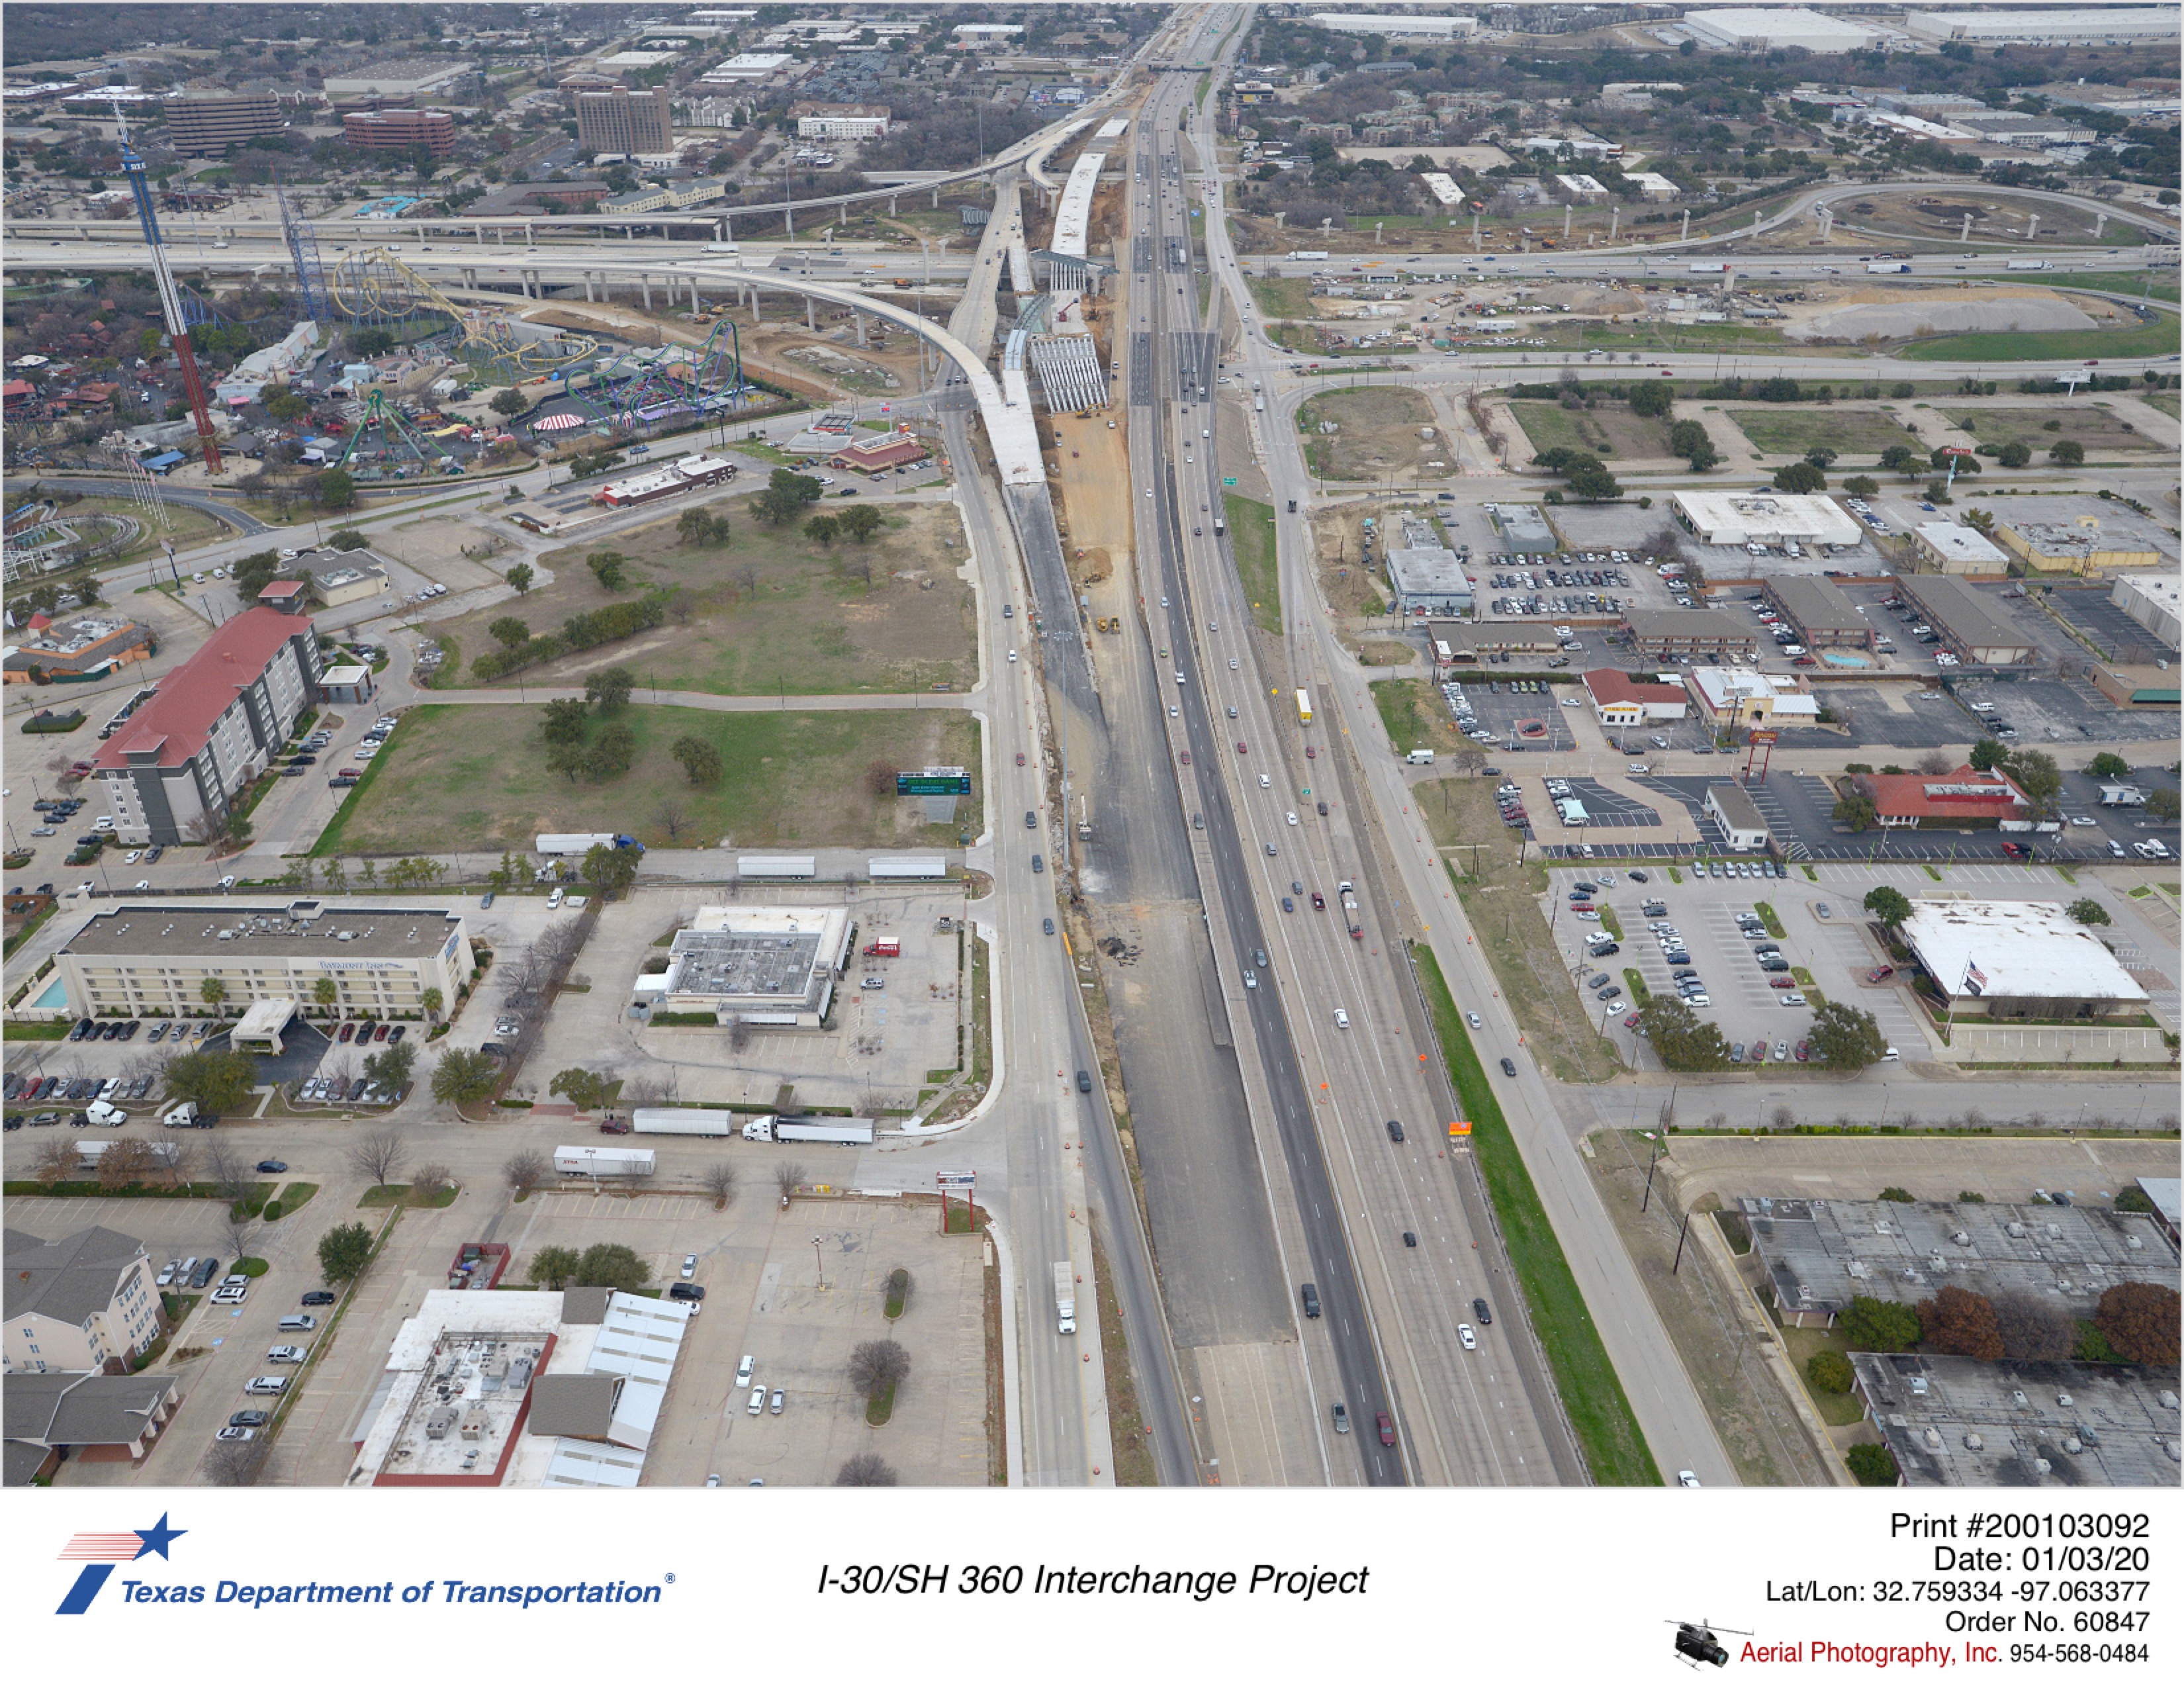 Looking north over SH 360 with I-30 in background. Can see active on the SH 360 southbound mainlane bridge and connection with directional connector ramps.